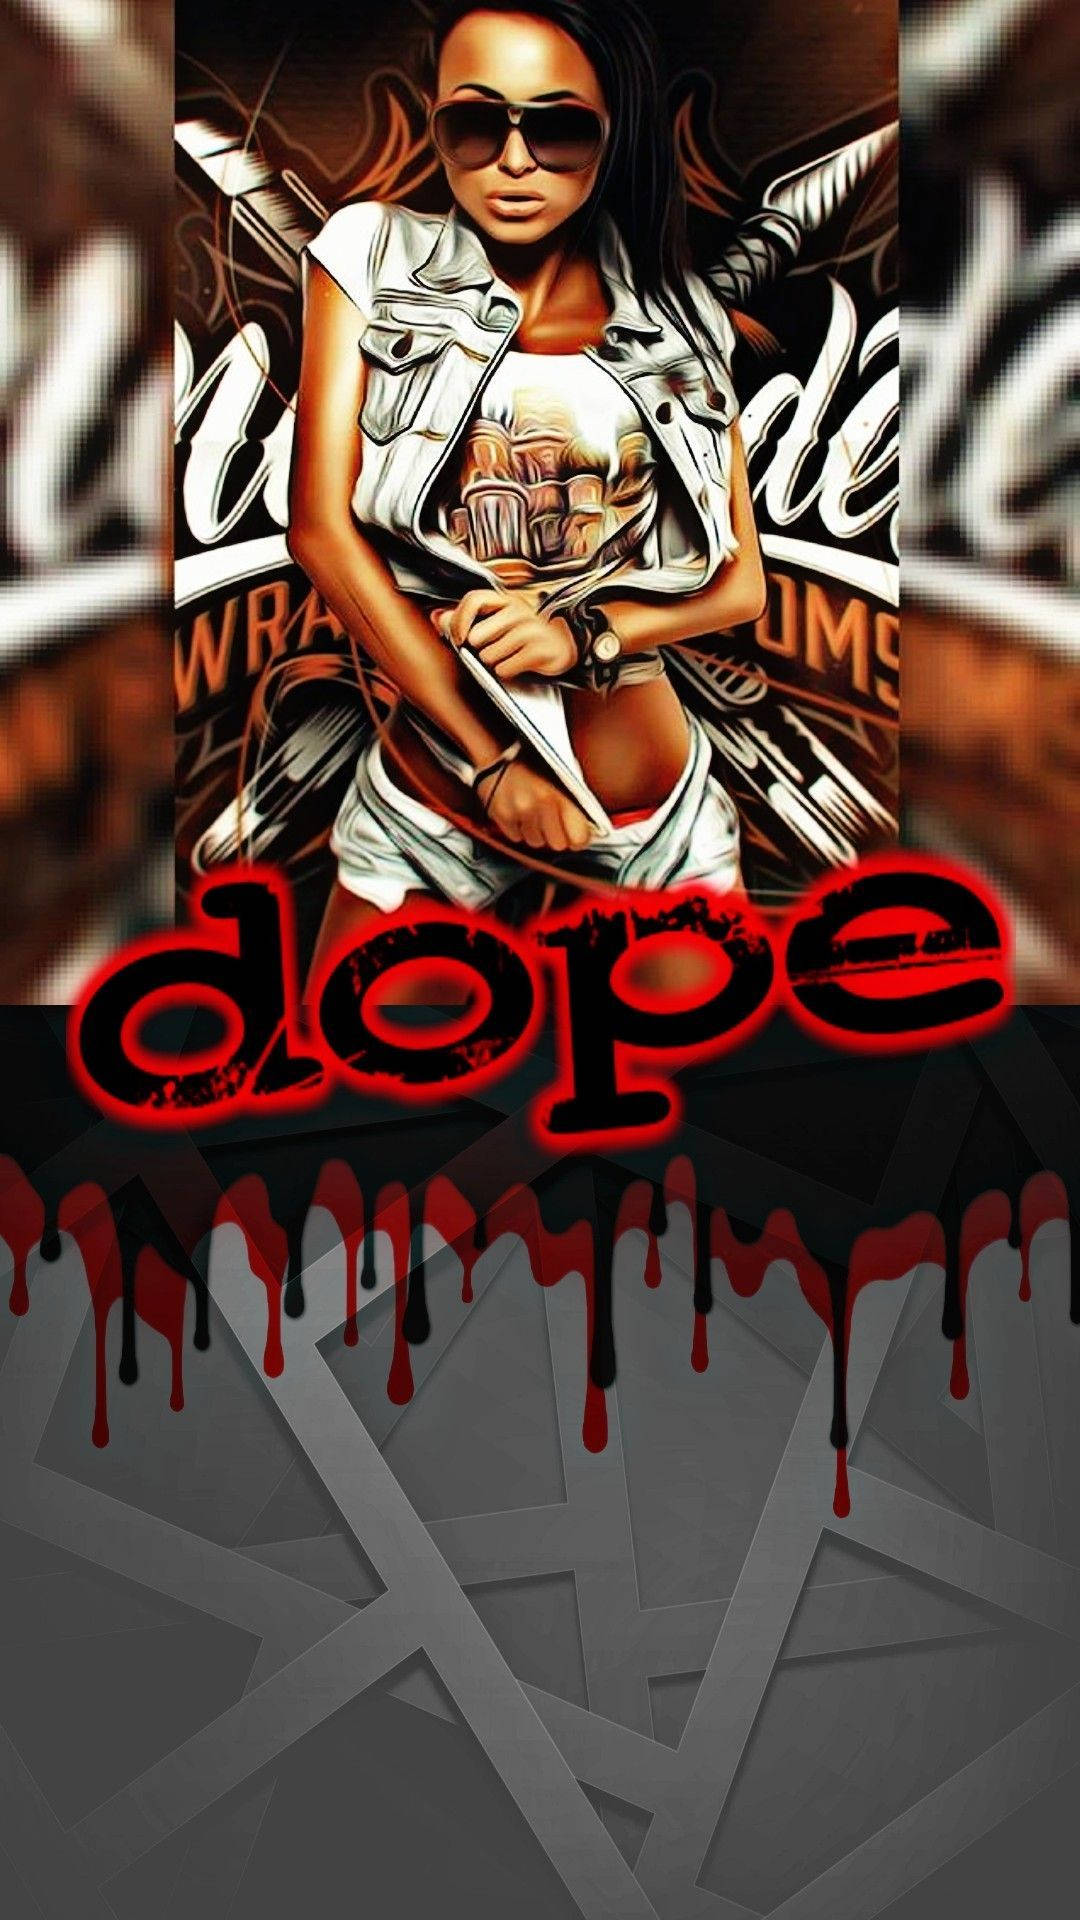 Experience the rush of Red Dope! Wallpaper